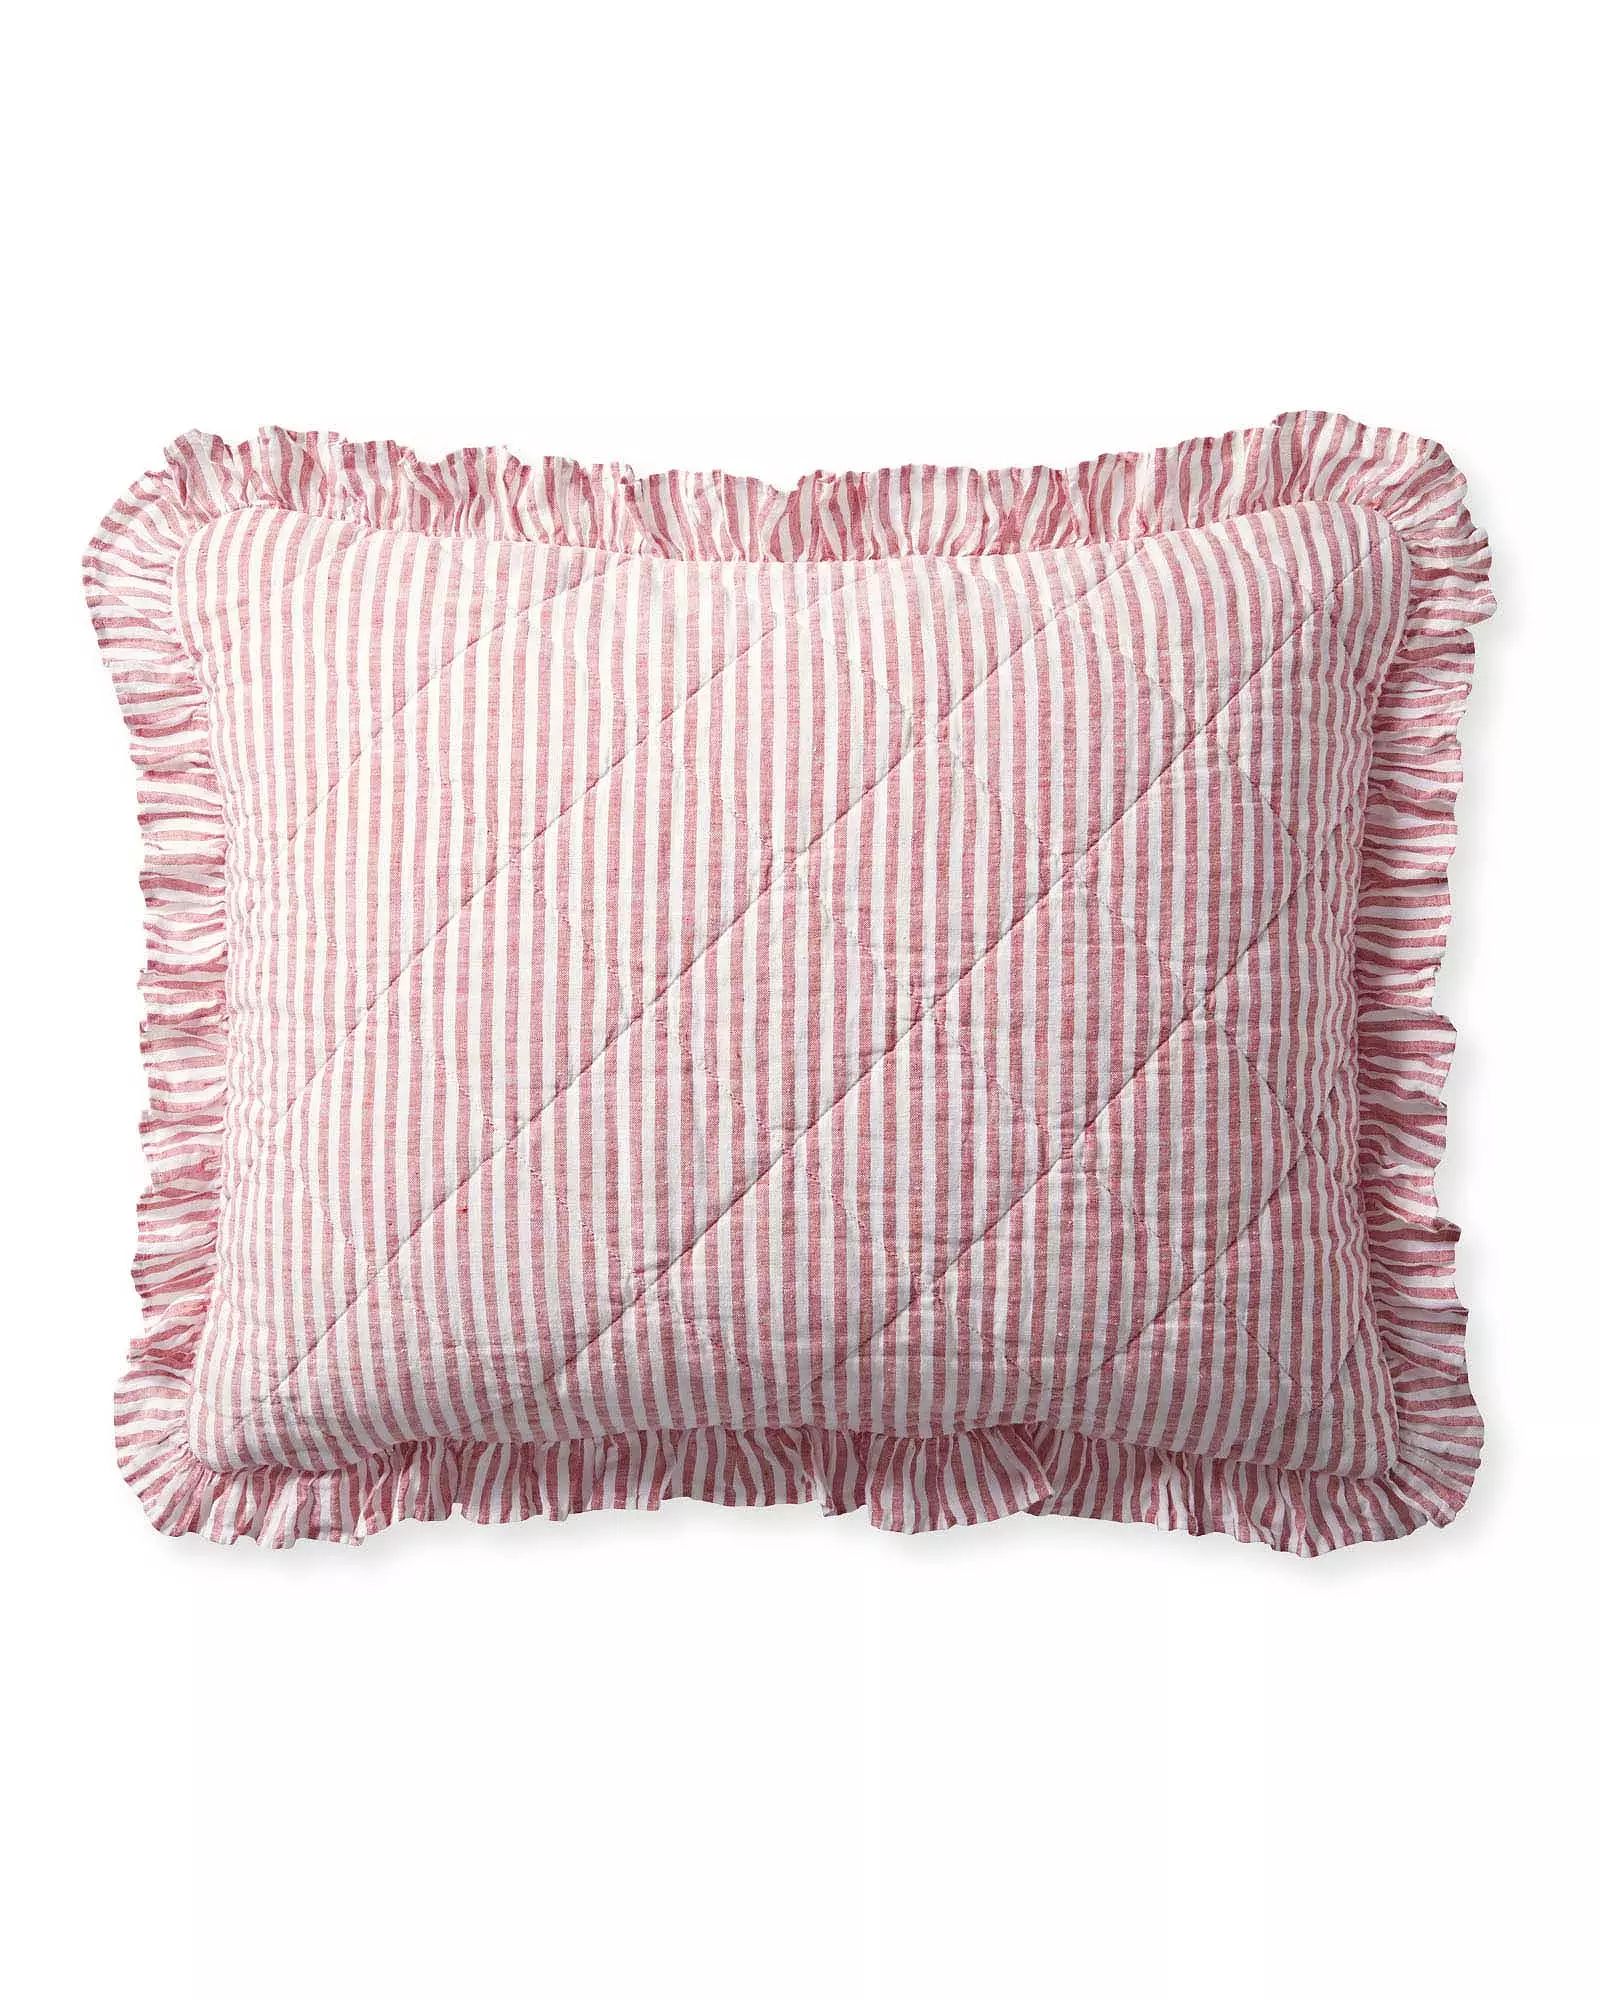 Nantucket Stripe Sham - Red | Serena and Lily